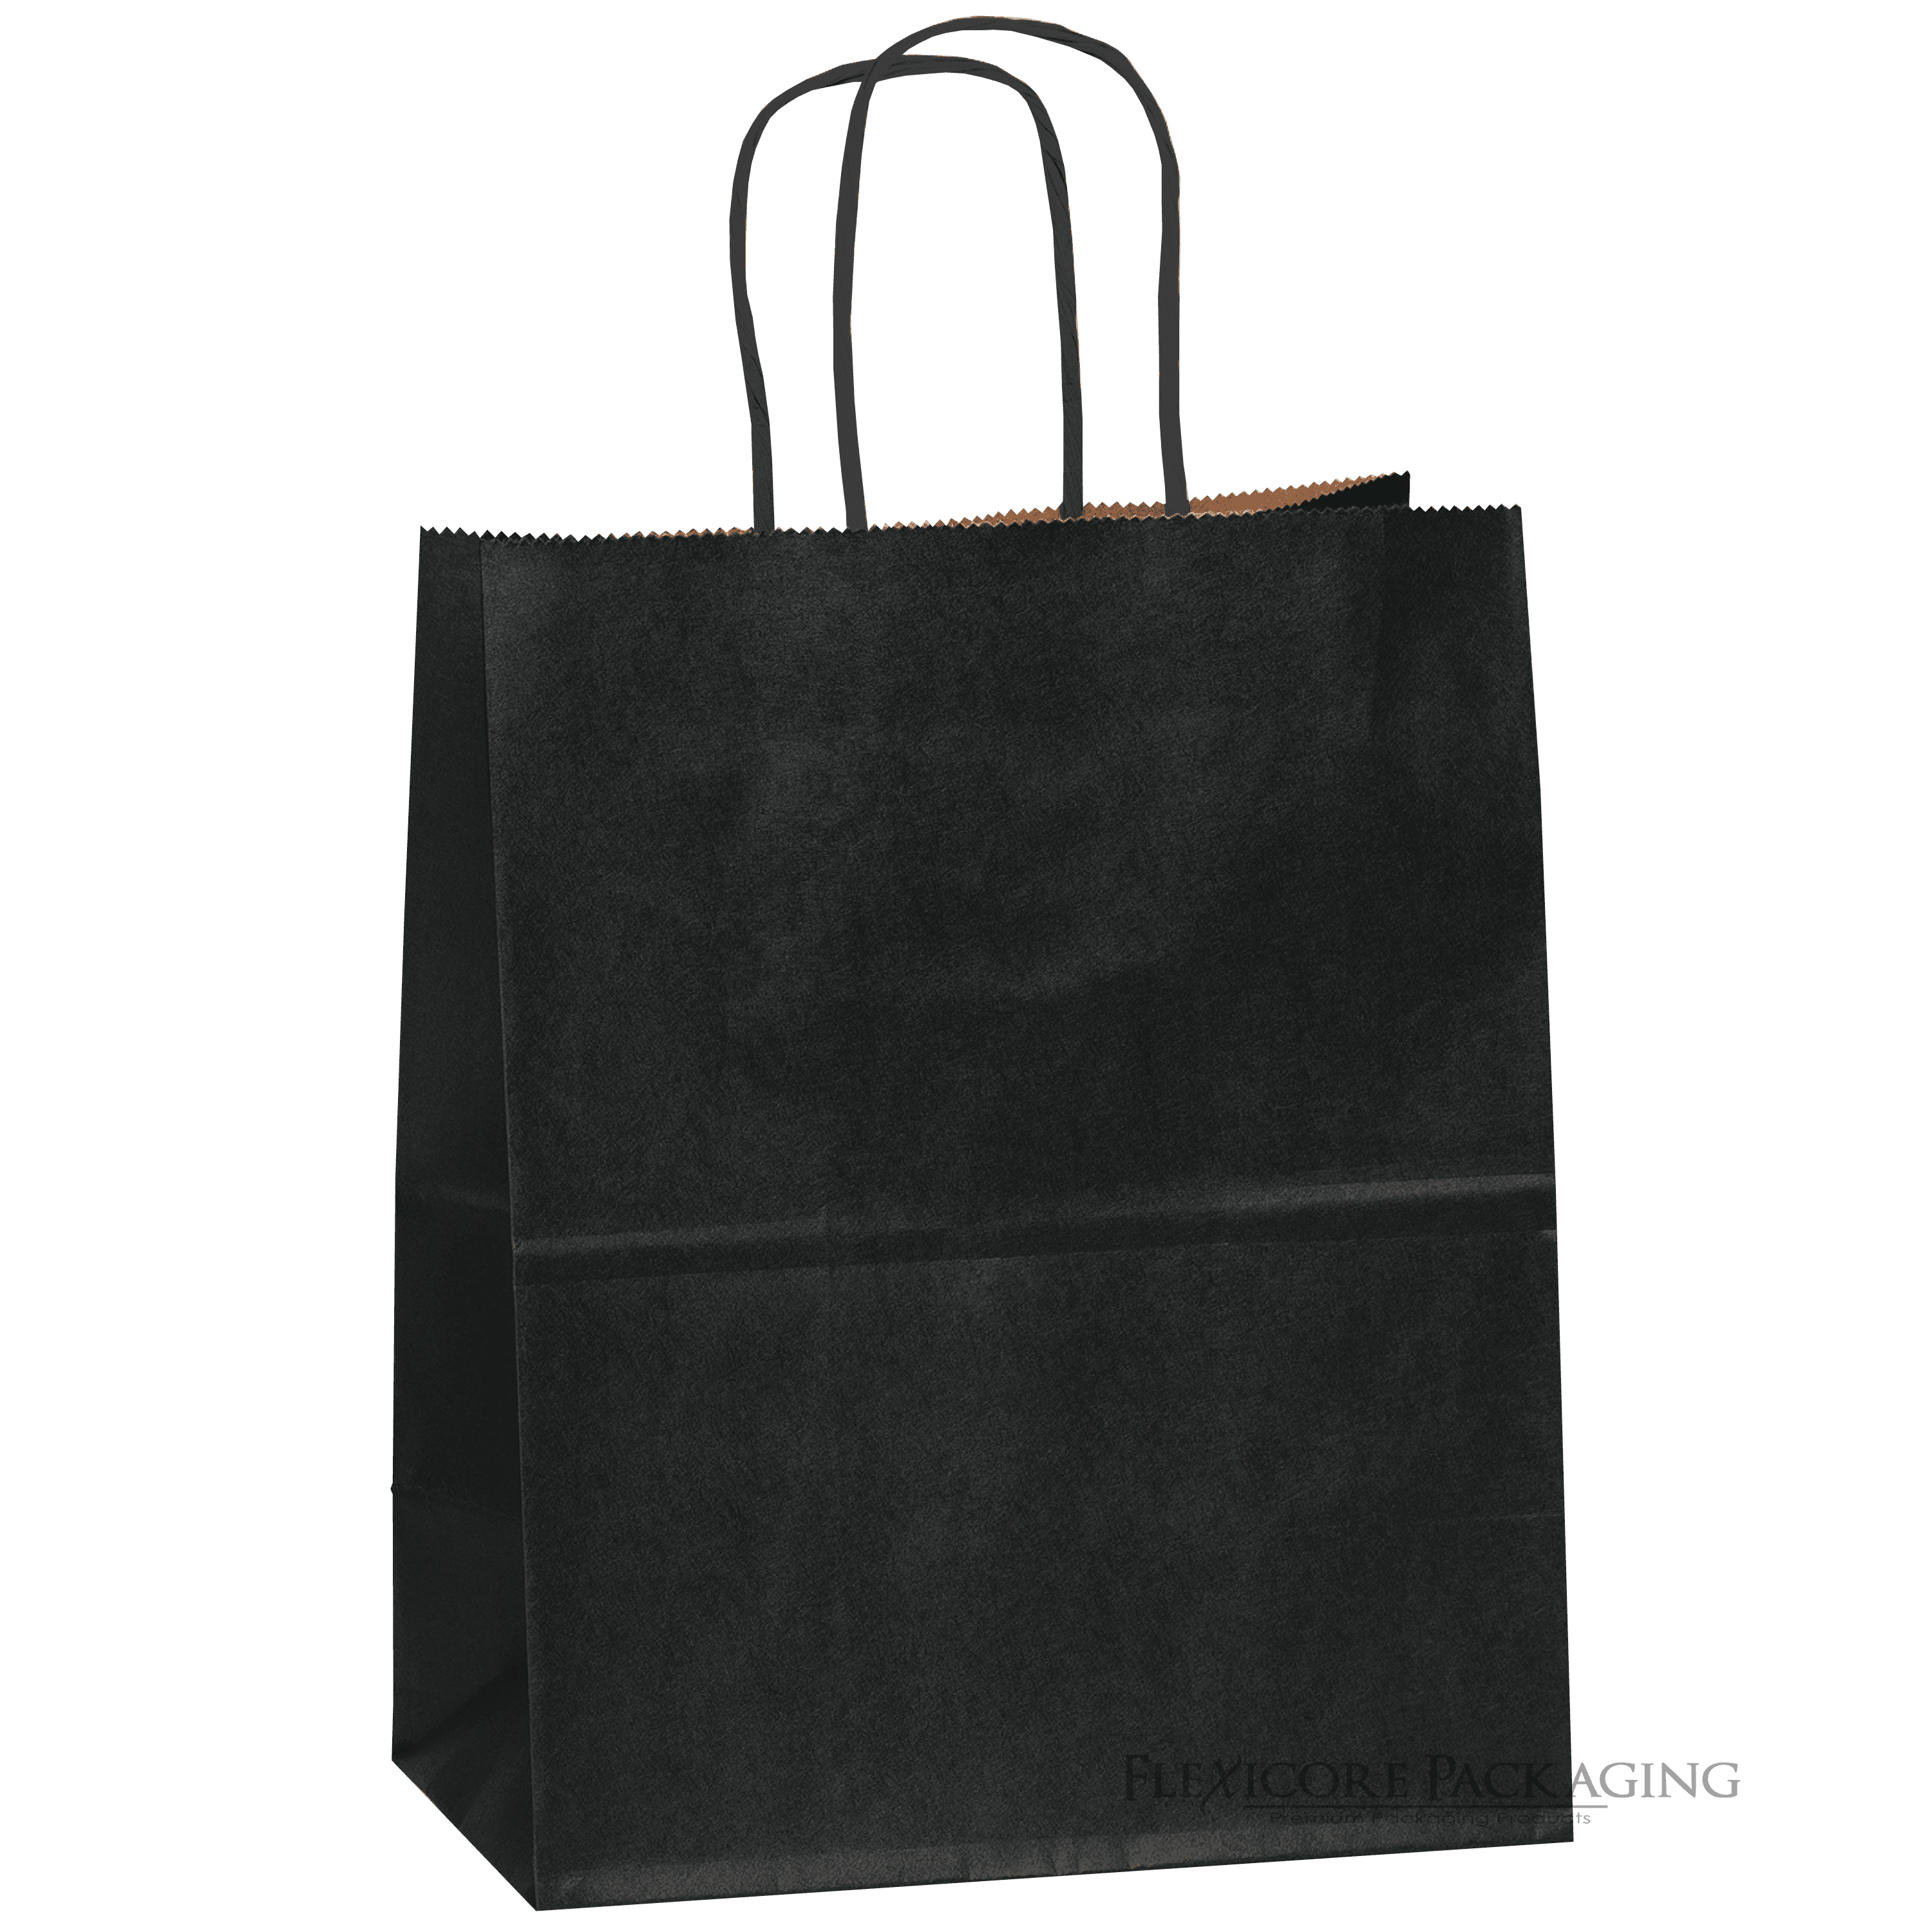  OfficeCastle 12 Pcs Black Paper Gift Bags with Handles,  8.5x4.5x10.5 Inch, Shopping Bags, Party Favors, Retail Bags